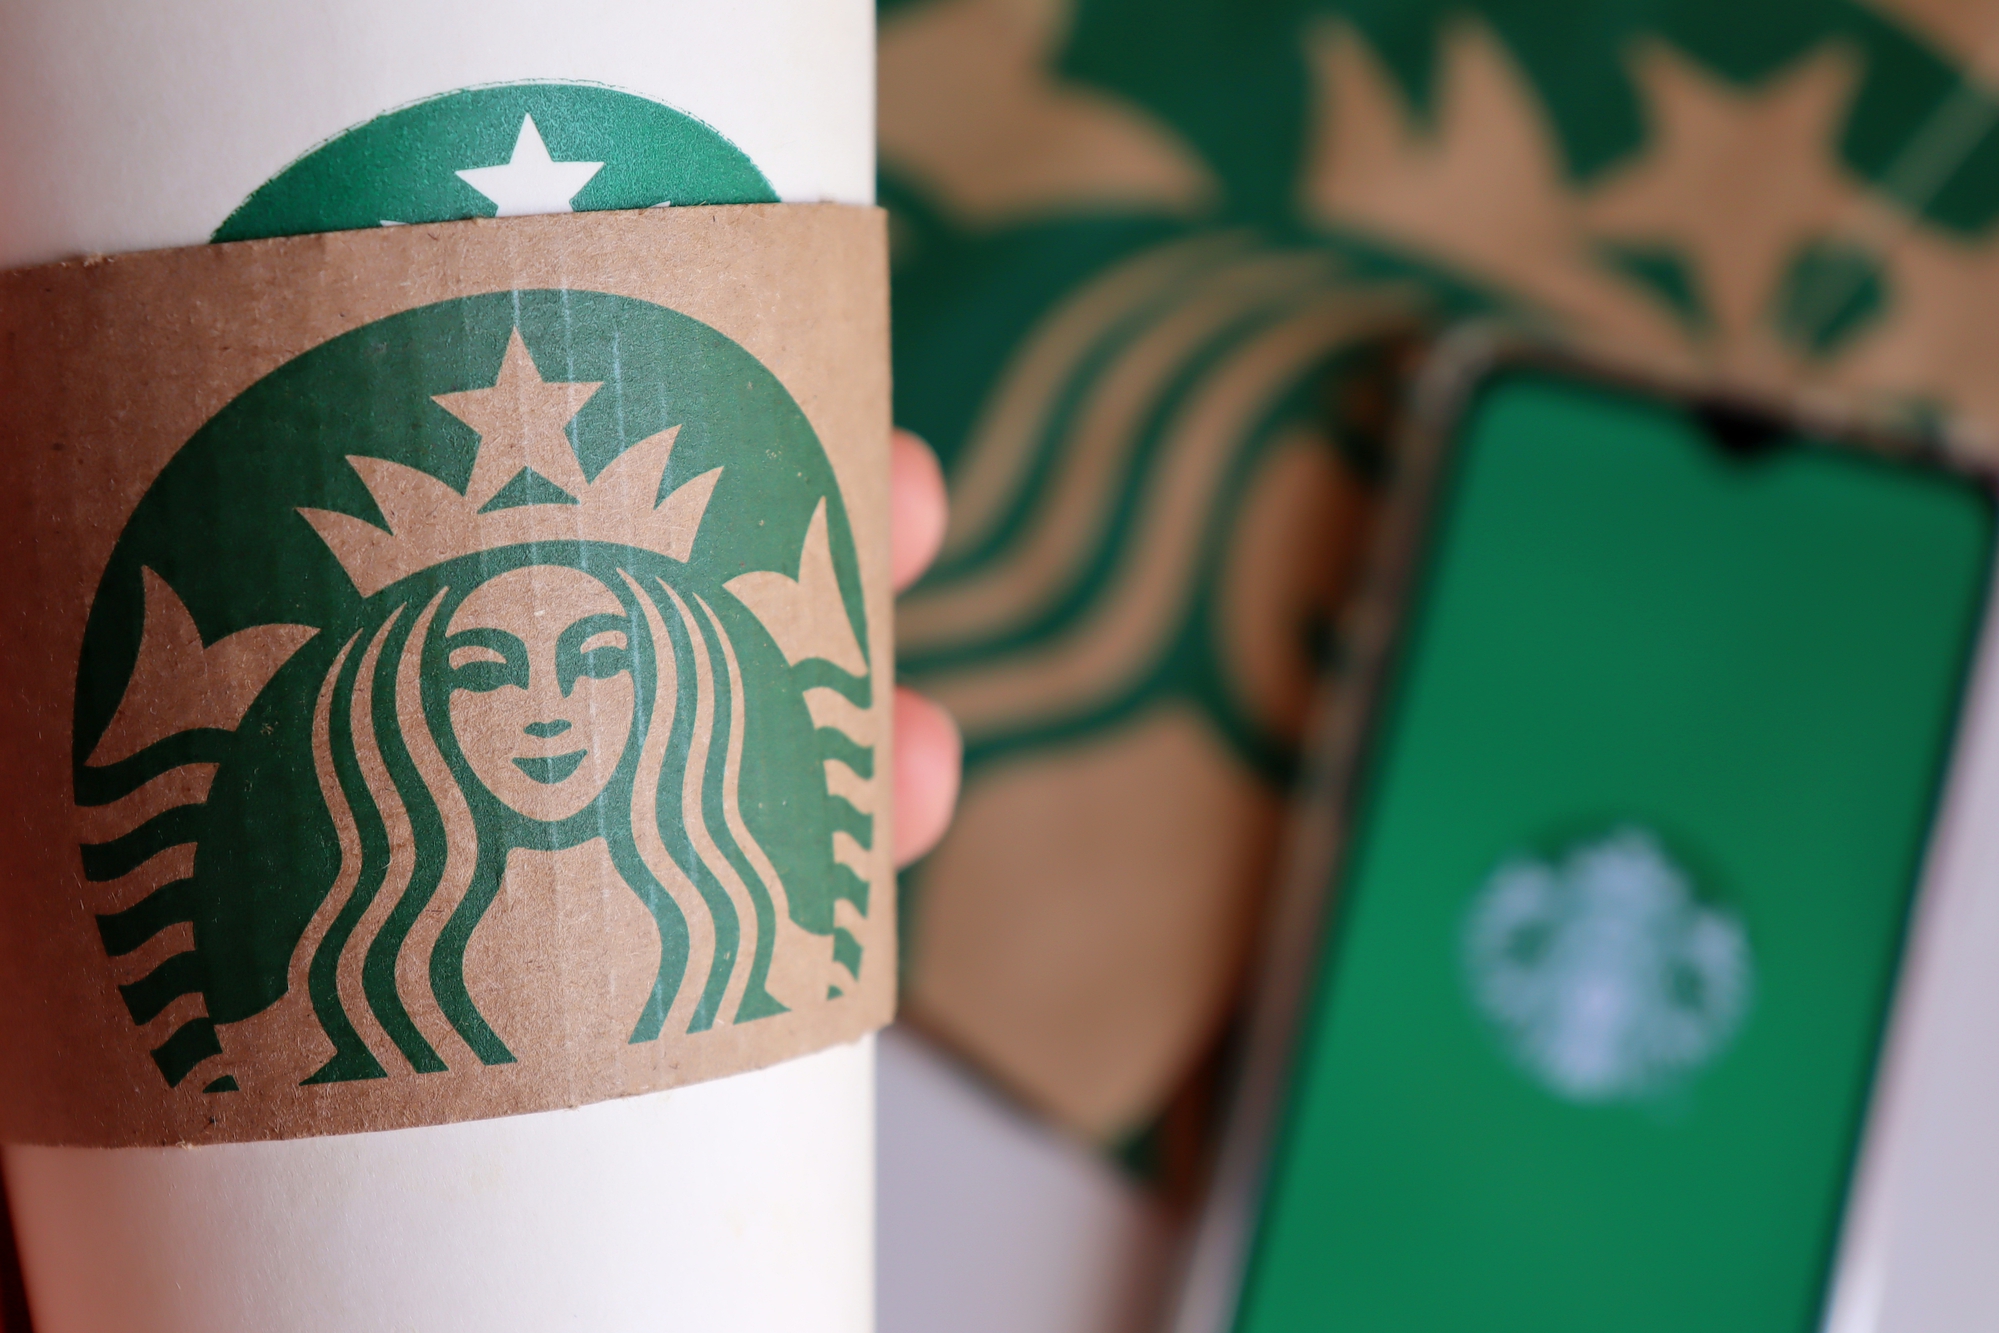 Starbucks Will Now Allow Customers To Use Personal Cups Even In The Drive-Thru